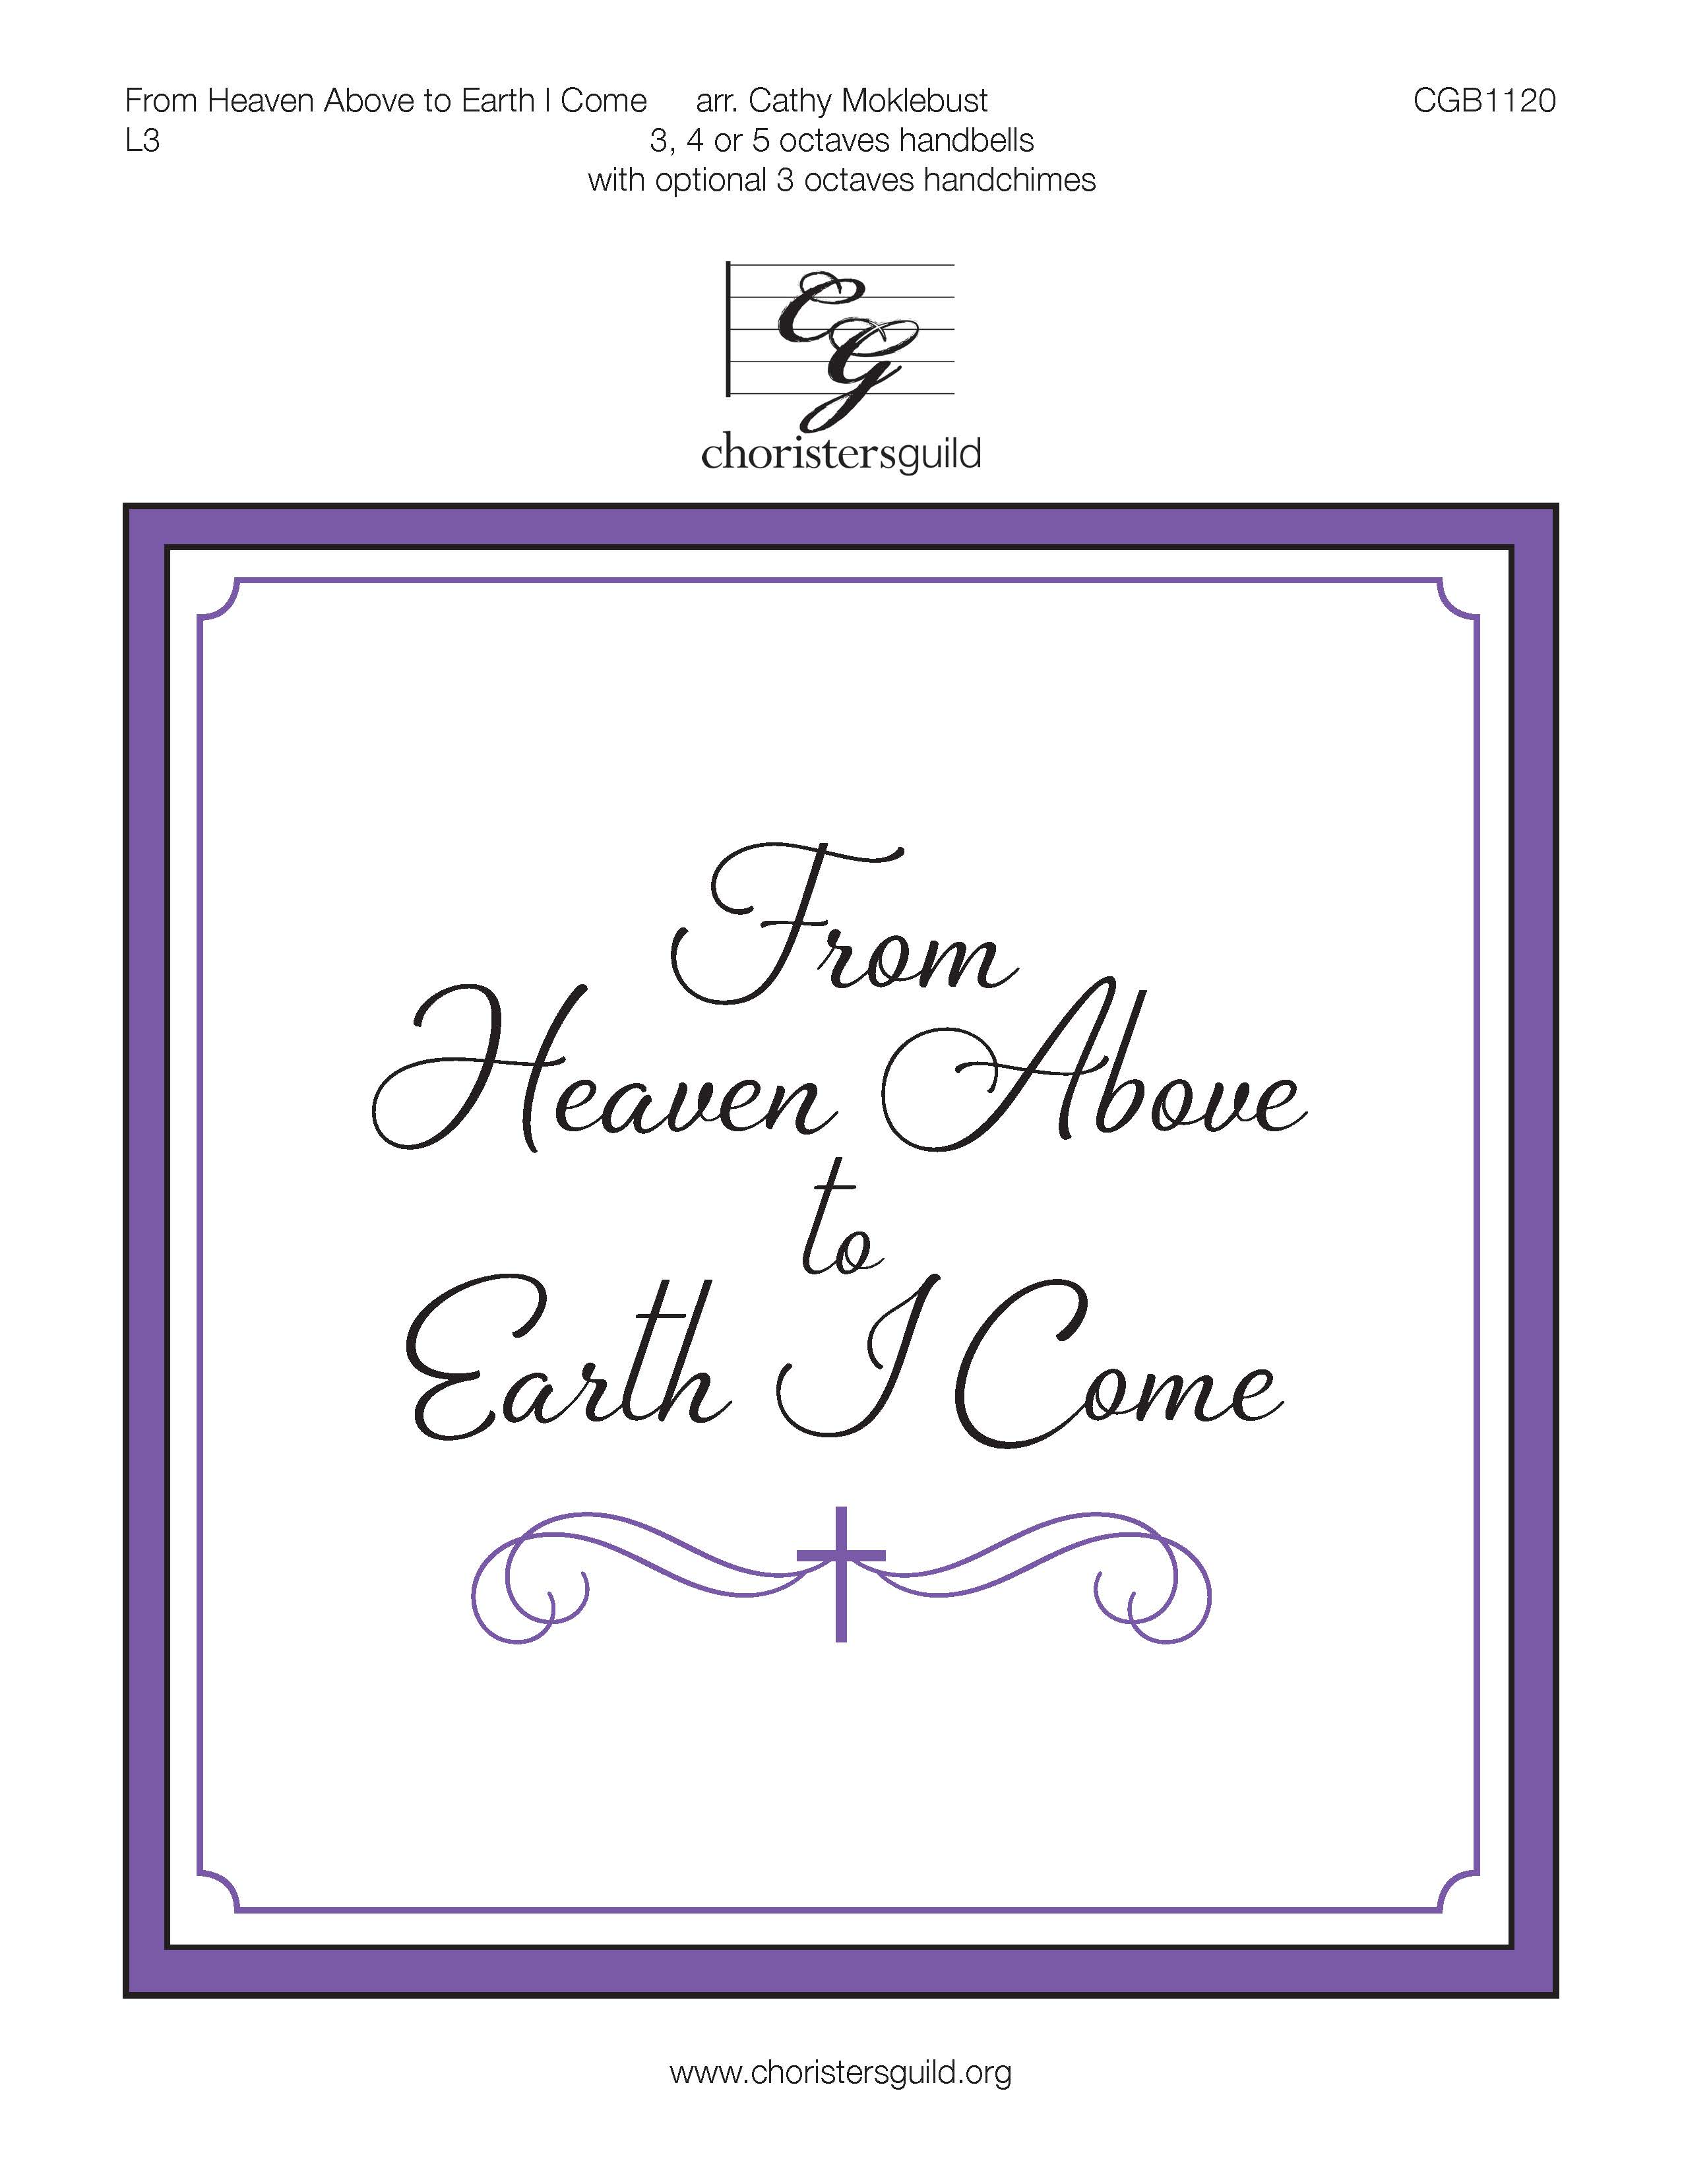 From Heaven Above to Earth I Come - 3-5 octaves